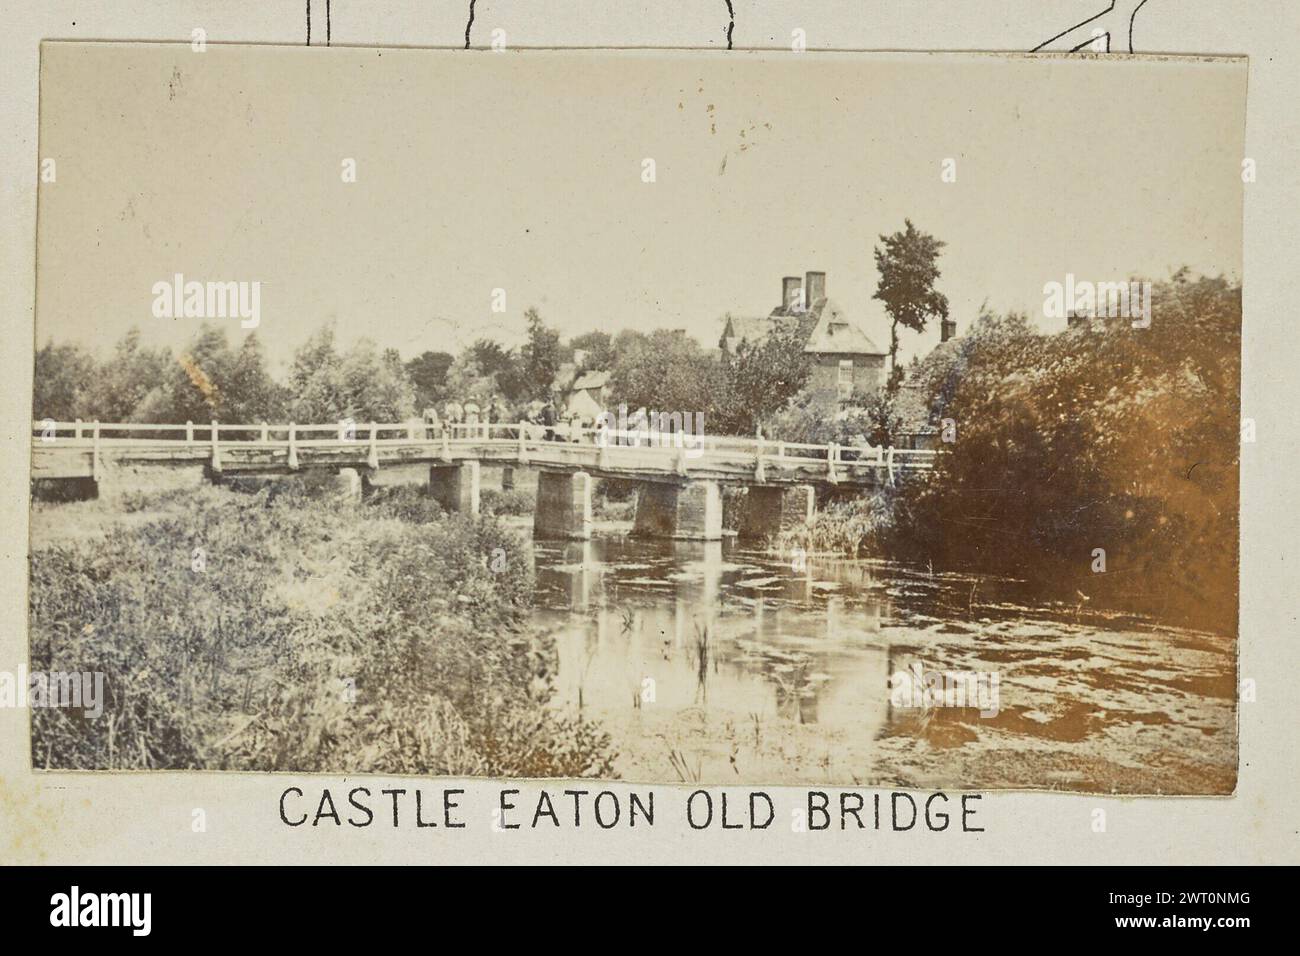 Castle Eaton Old Bridge. Henry W. Taunt, photographer (British, 1842 - 1922) 1897 One of three tipped-in photographs illustrating a printed map of Castle Eaton, Kempsford, and the surrounding area along the River Thames. The photograph shows a view of a wooden bridge over the river at Castle Eaton. Several men and women stand on the bridge looking out at the water. (Recto, mount) lower center, below image, printed in black ink: 'CASTLE EATON OLD BRIDGE' Stock Photo